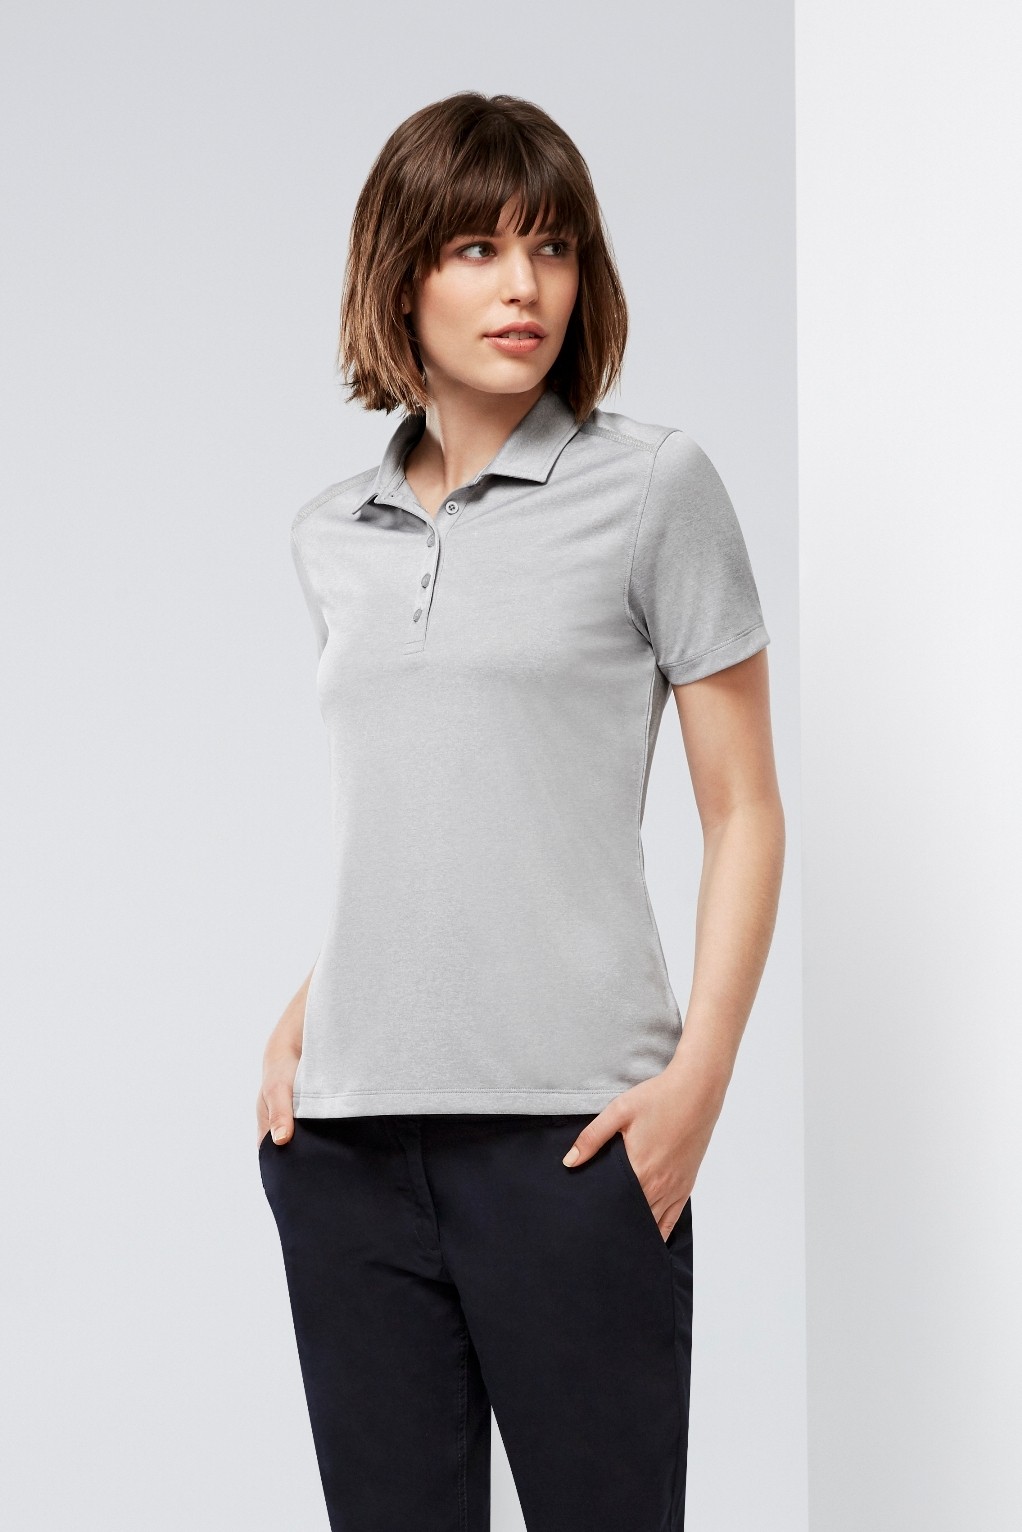 Buy Ladies Aero Polo Shirts - Quick Dry, Breathable, Price Point in NZ ...